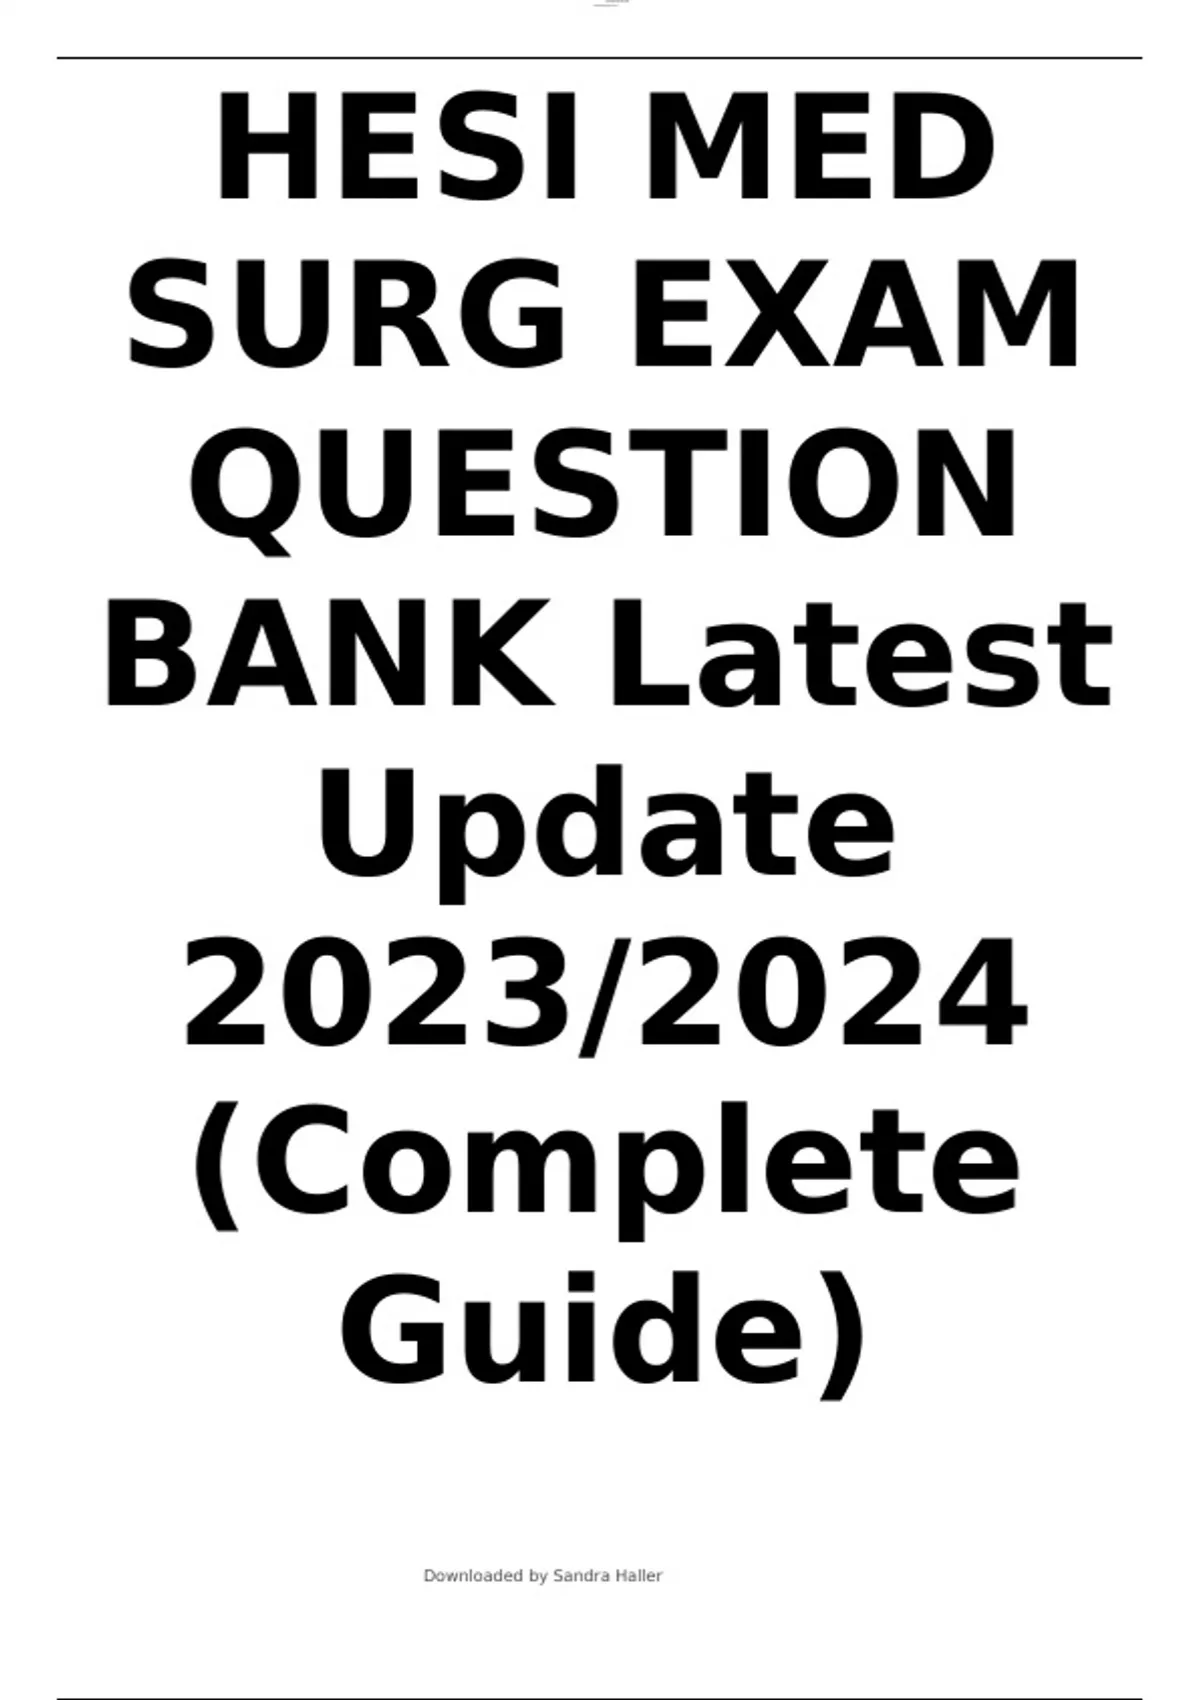 HESI MED SURG EXAM QUESTION BANK Latest Update 2023/2024